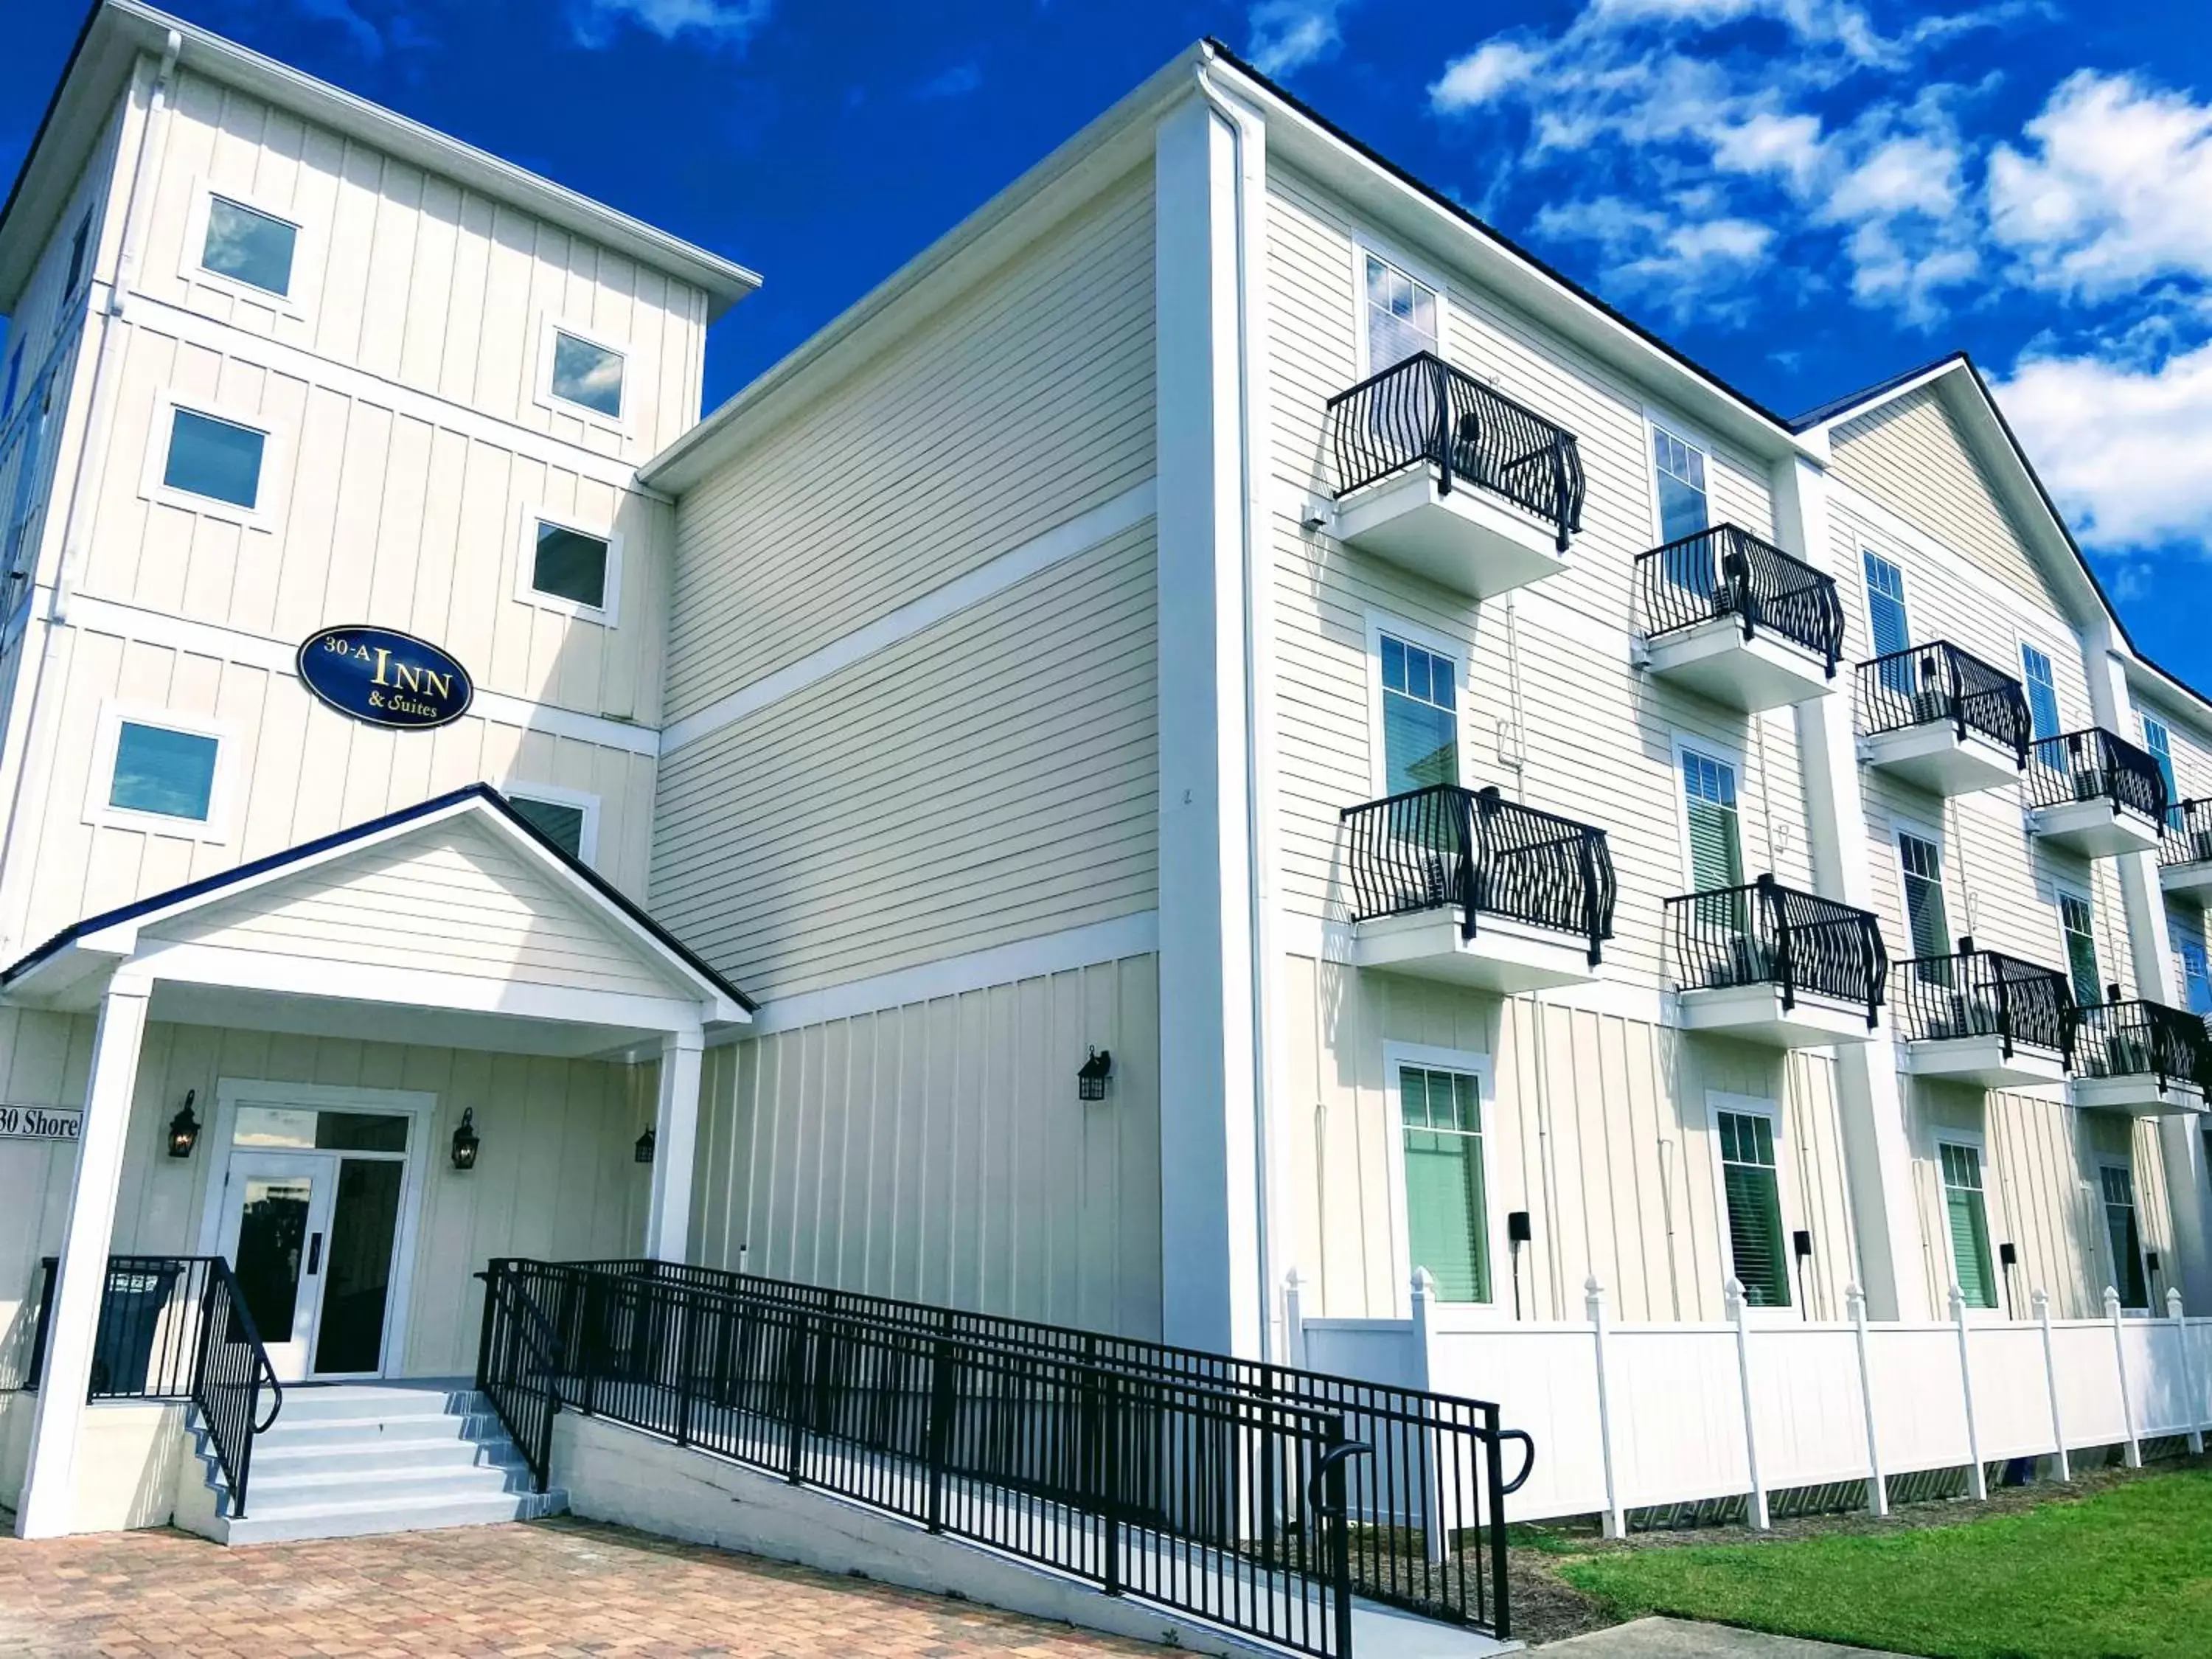 Property Building in 30-A Inn & Suites